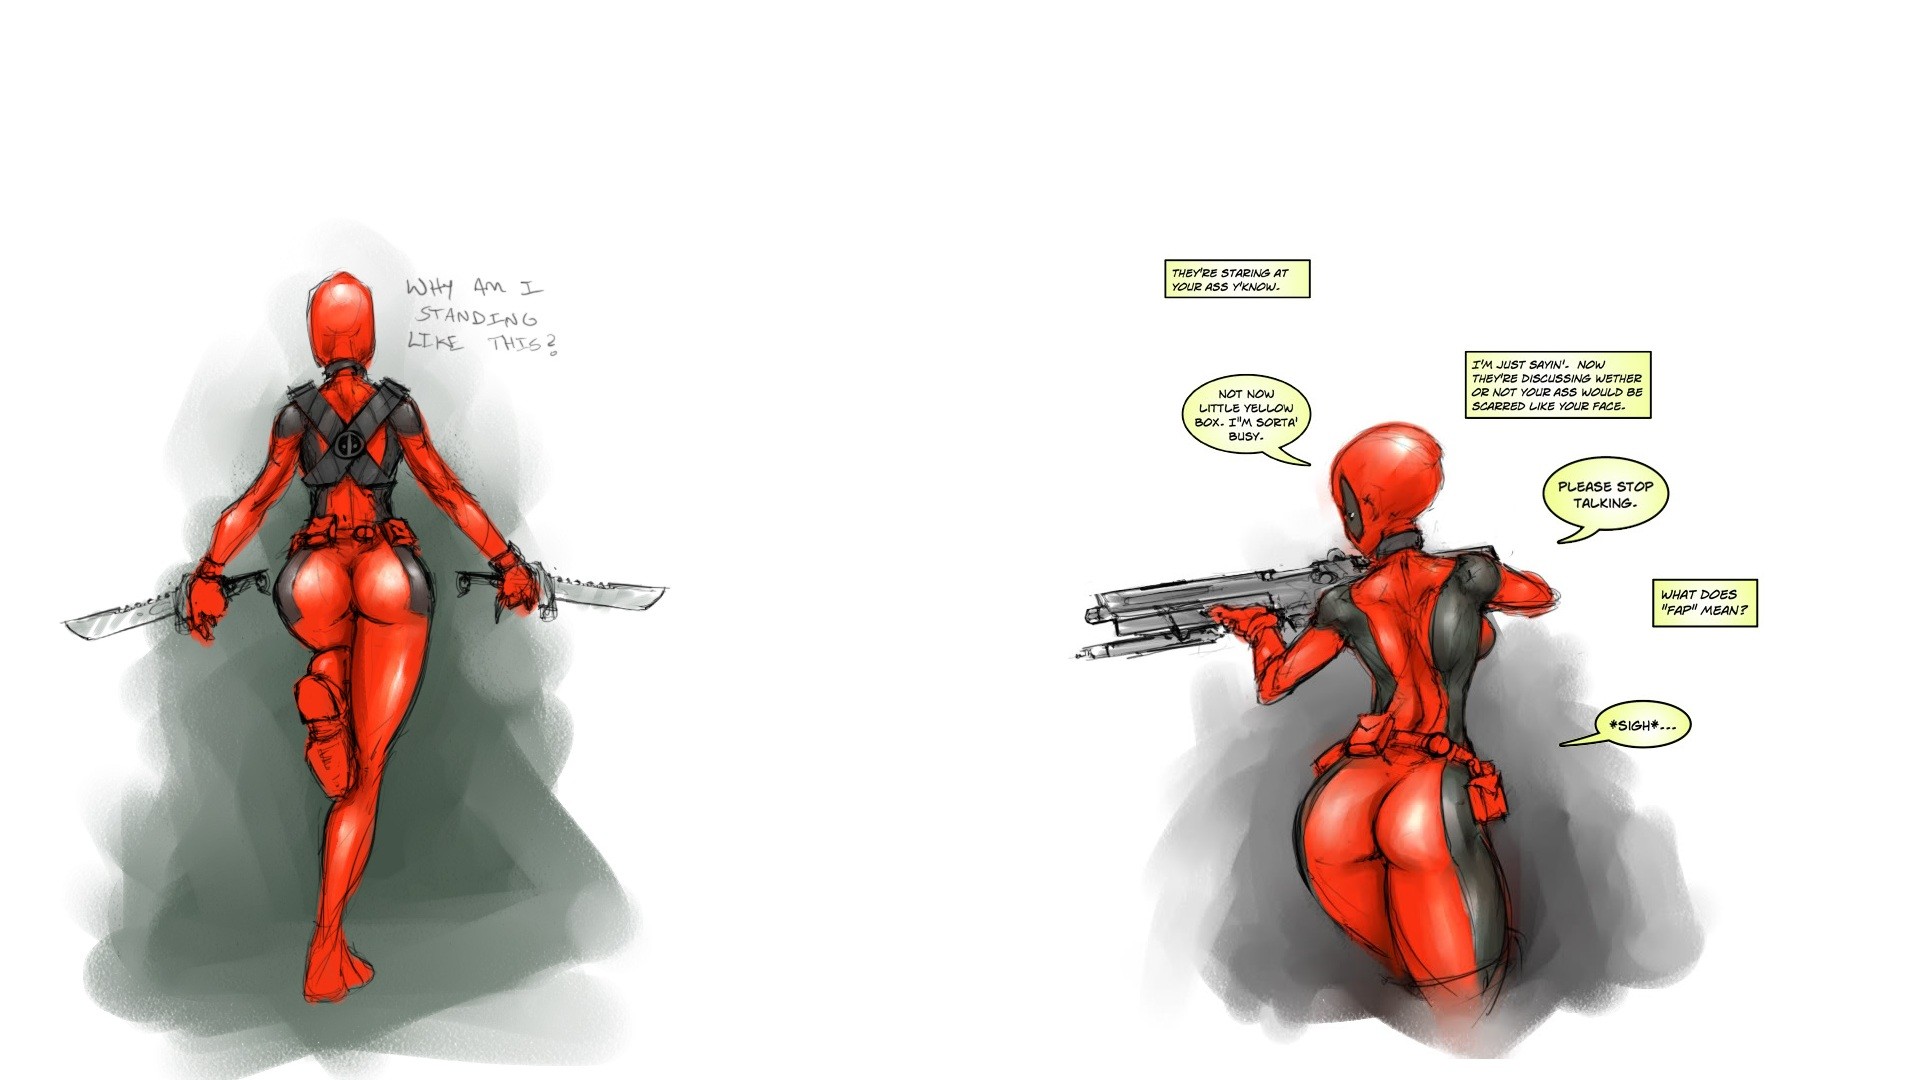 1920x1080 Funny Deadpool wallpaper for your phone : Marvel ...